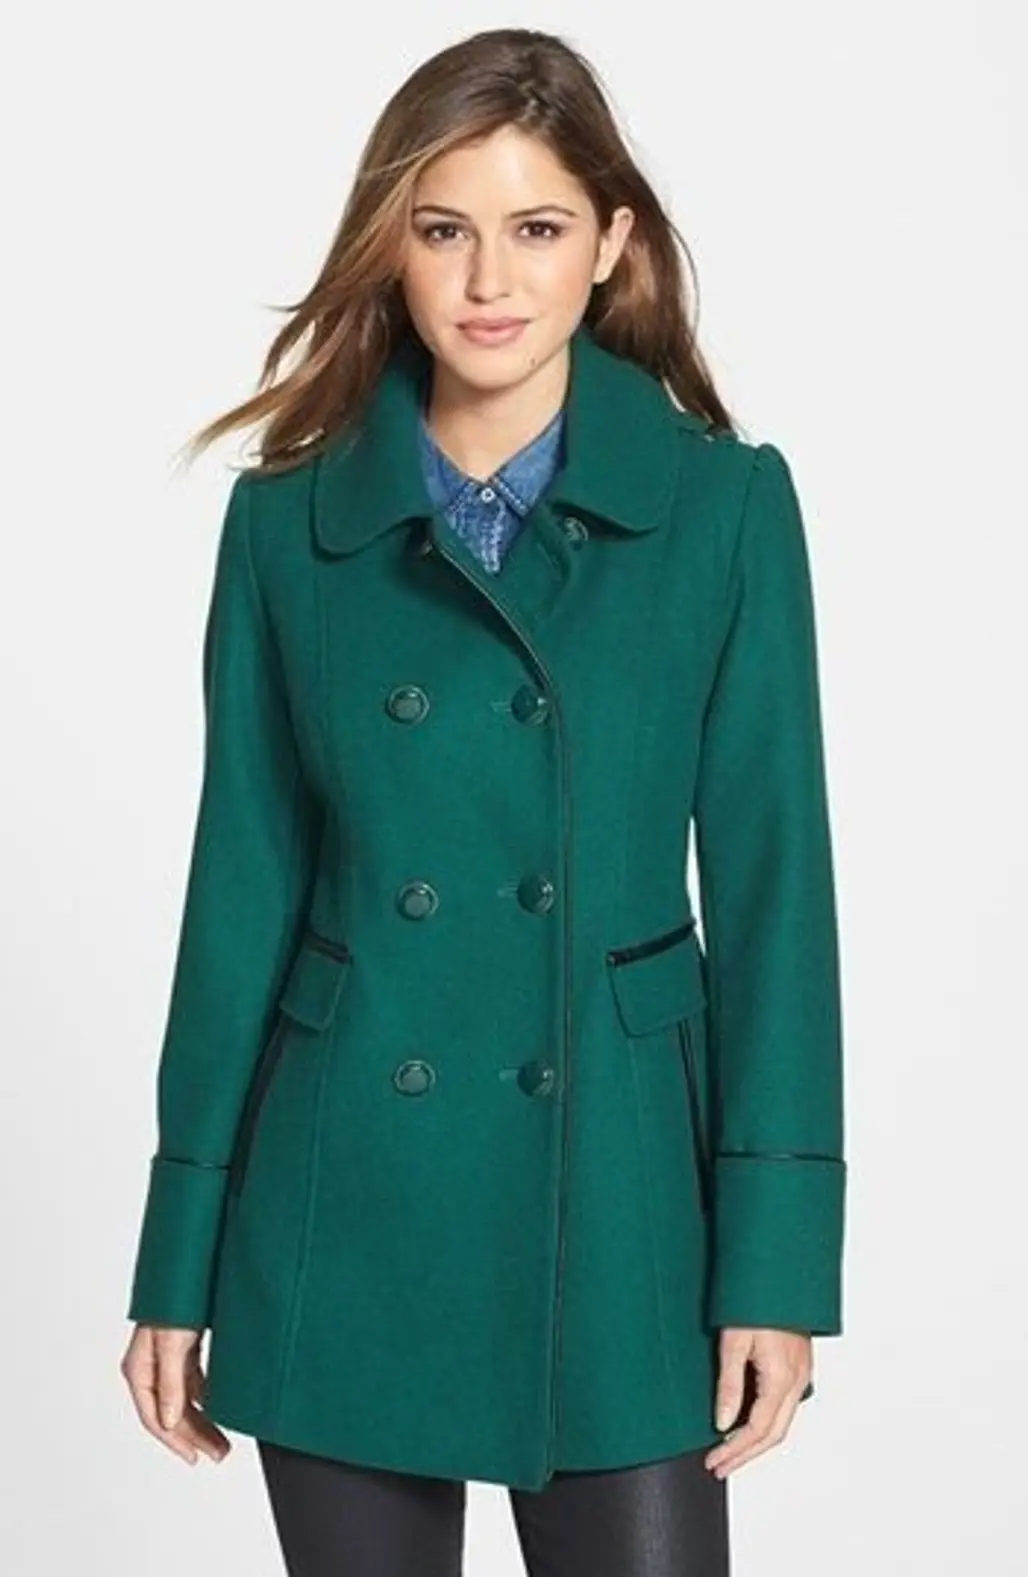 7 Jewel Tone Coats to Wear This Winter ...